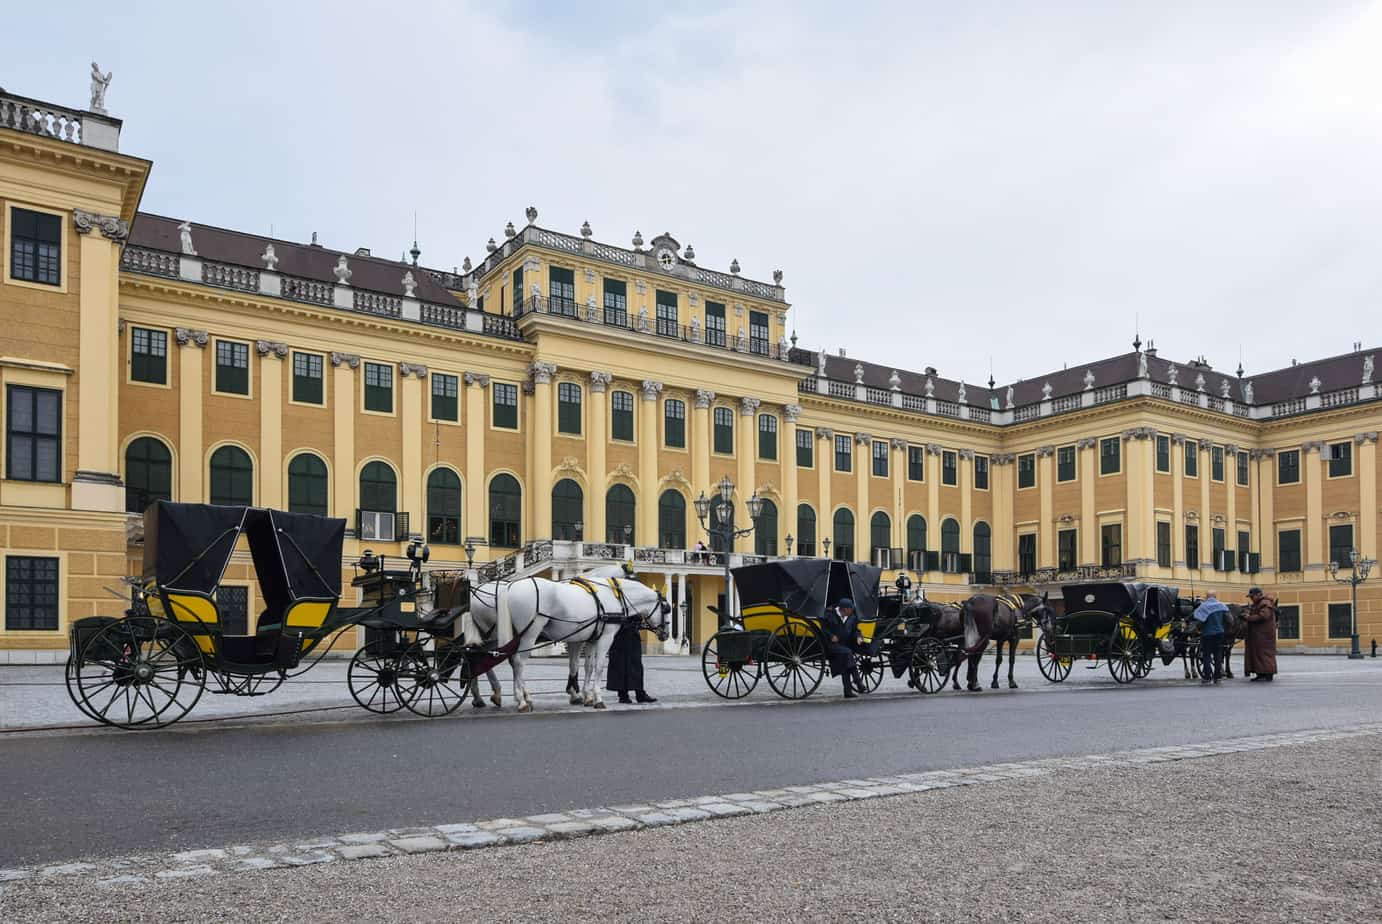 Horse-drawn carriages in front of a yellow palace.